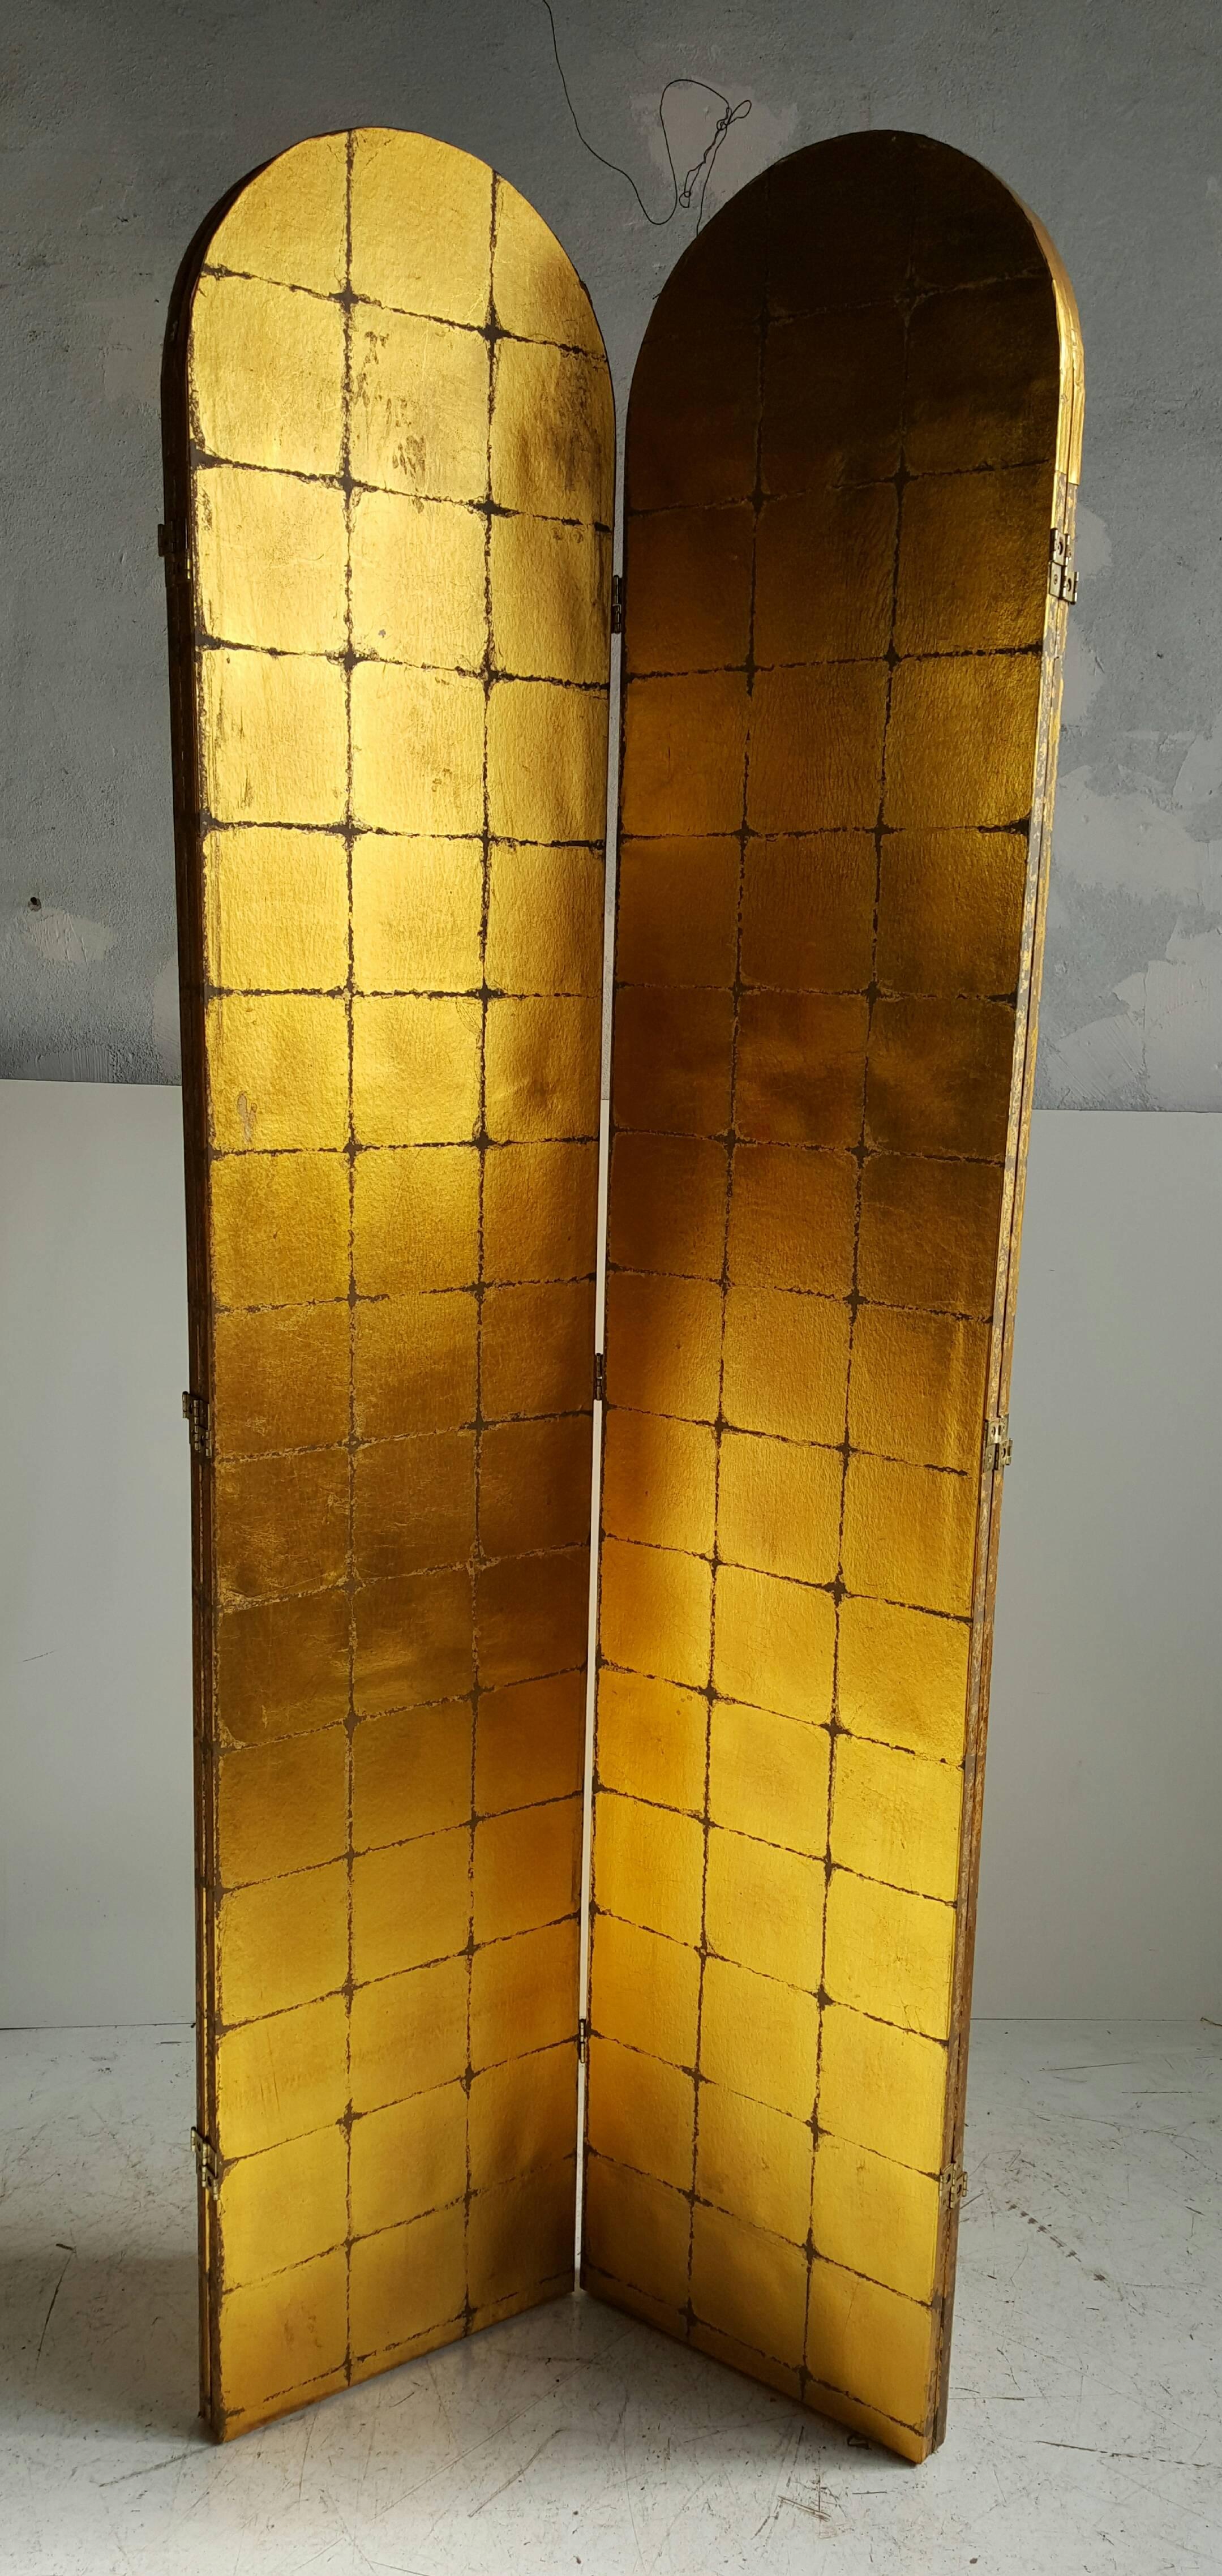 Gilt Highly Decorated Four-Panel Folding Screen /Divider, Gold Leaf, Made in Italy